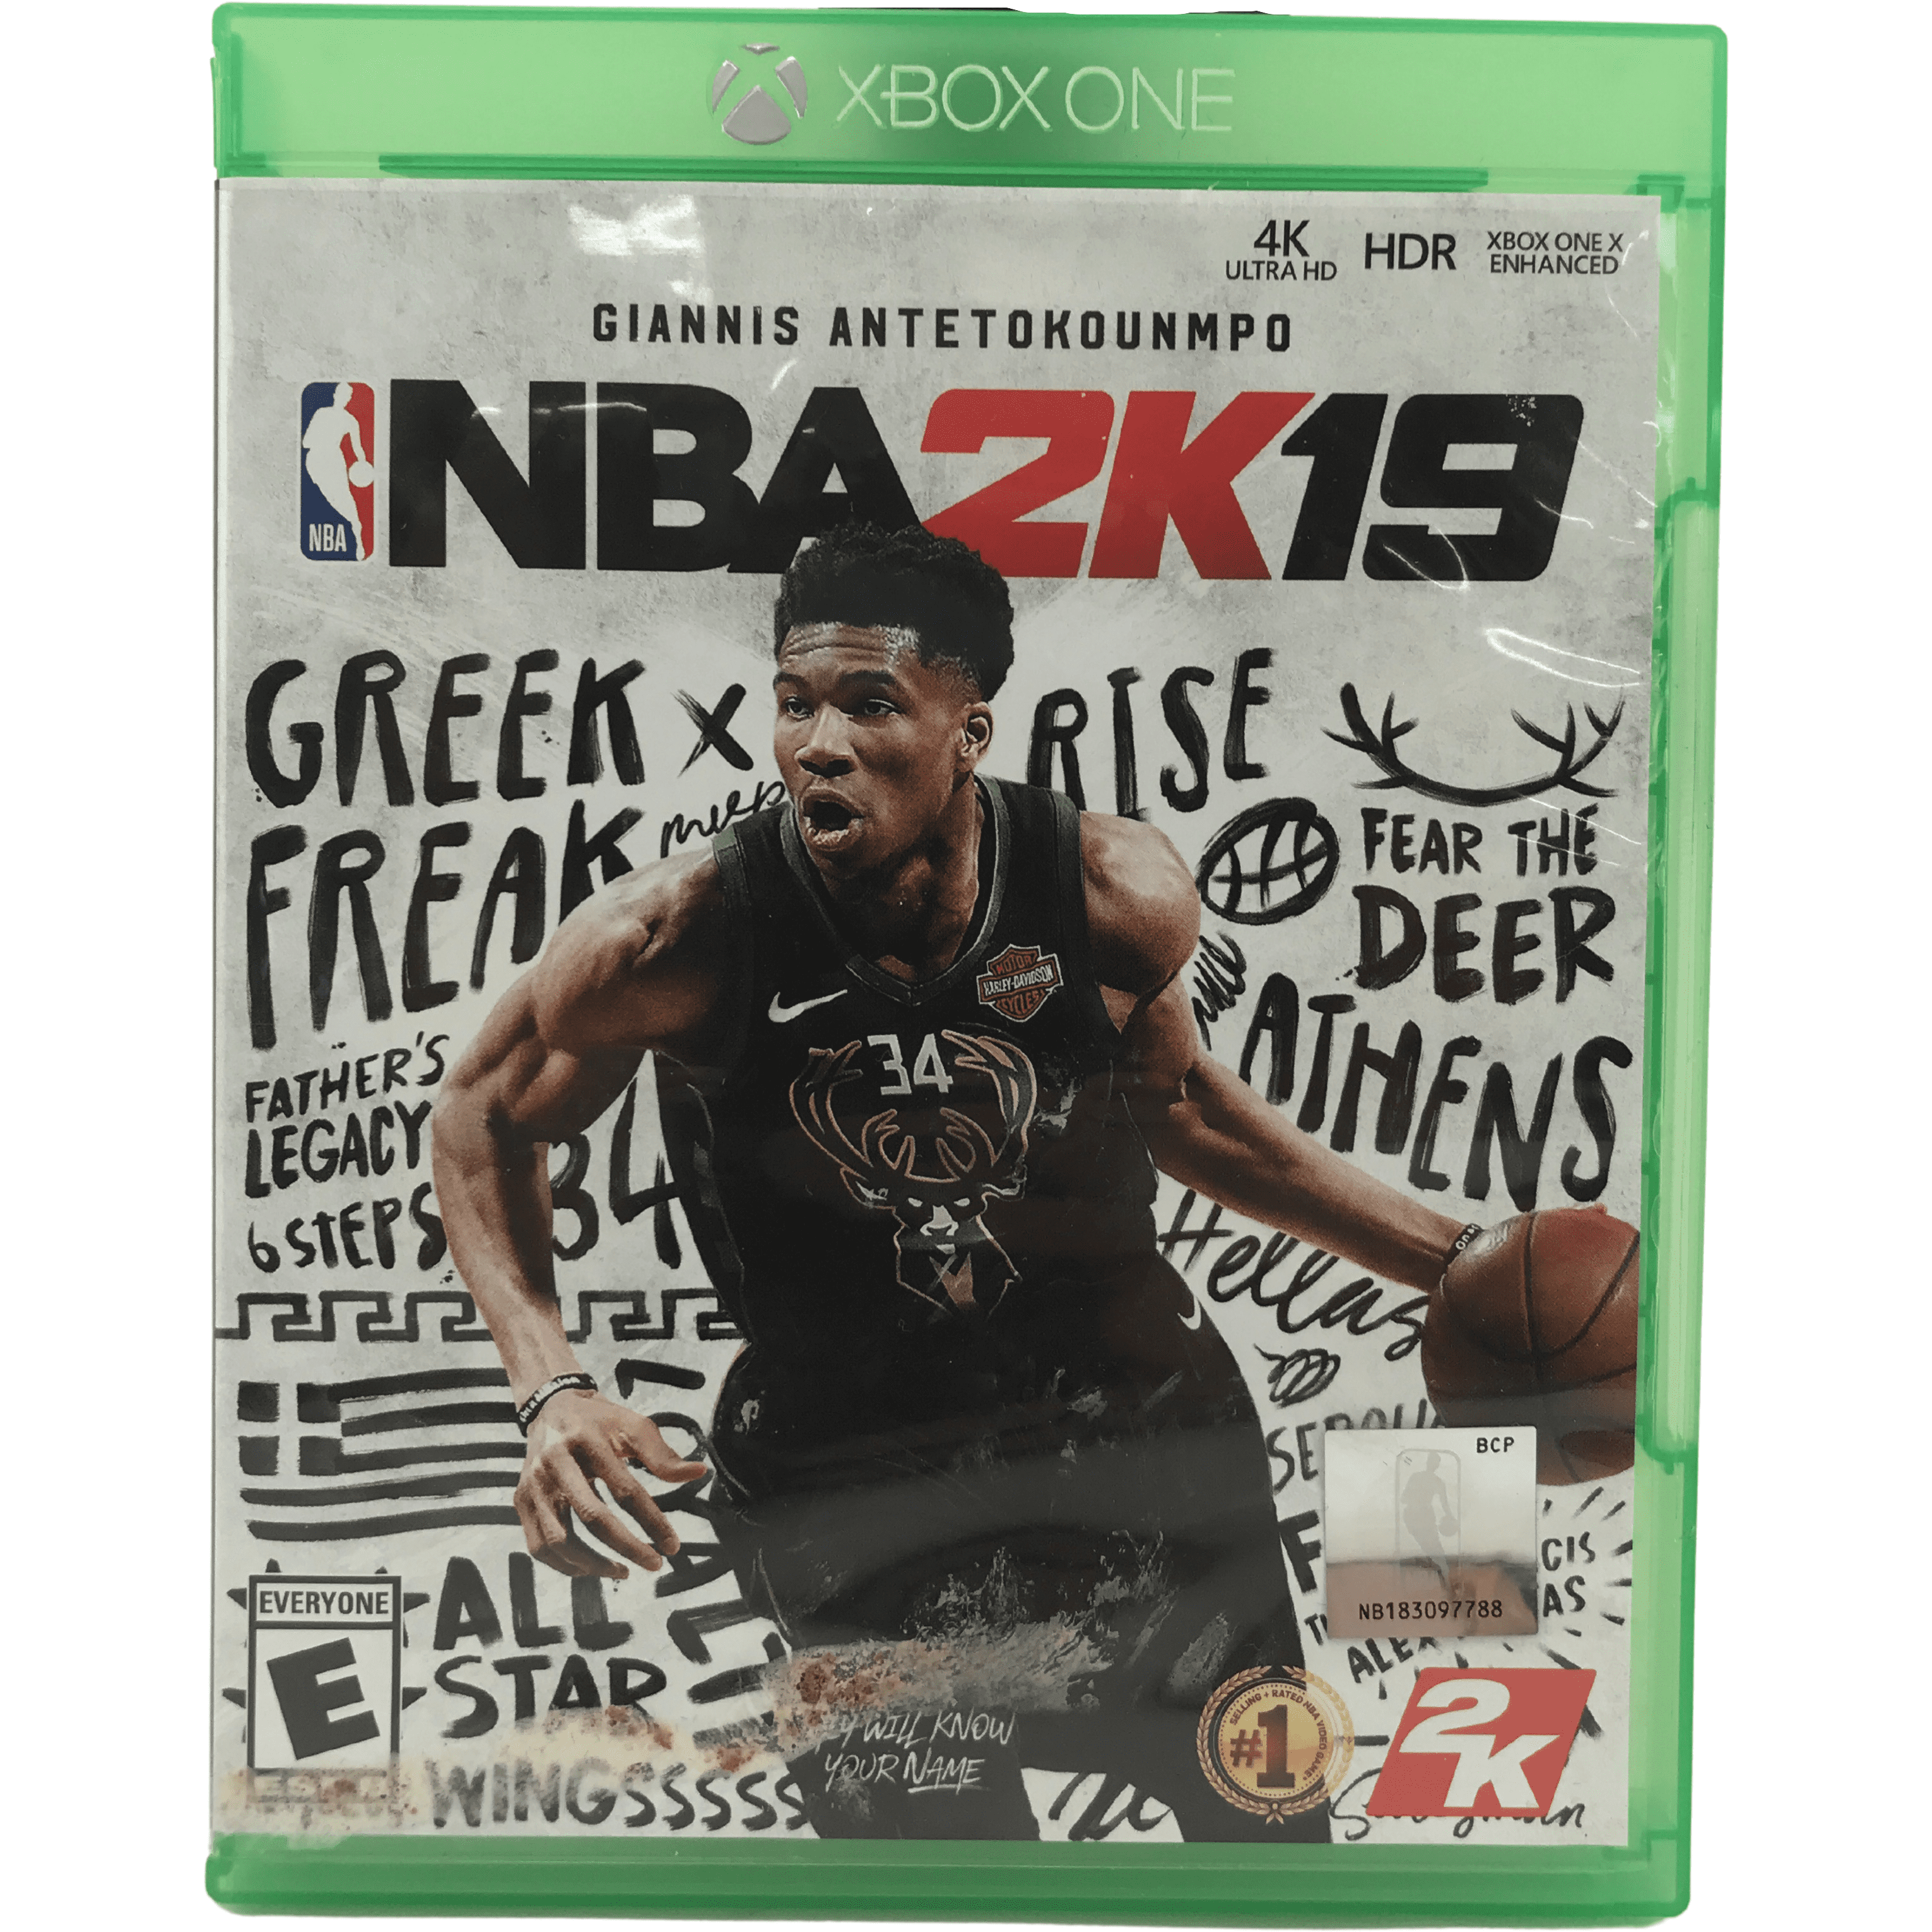 Xbox One "NBA 2K19" Game: Video Game: Opened